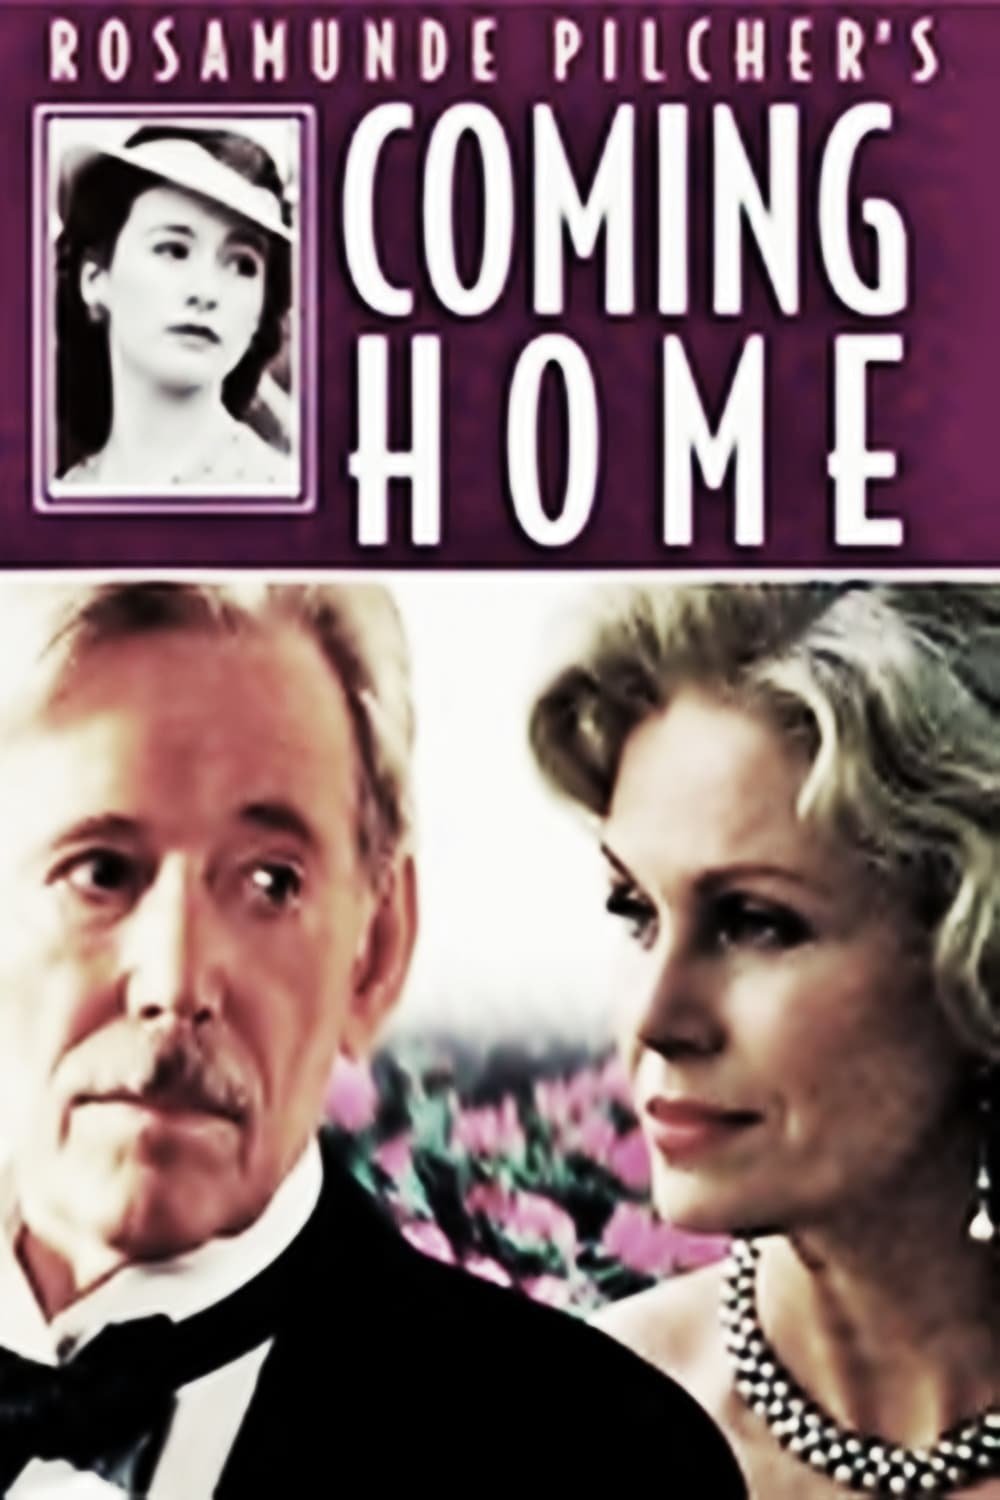 coming home movie reviews